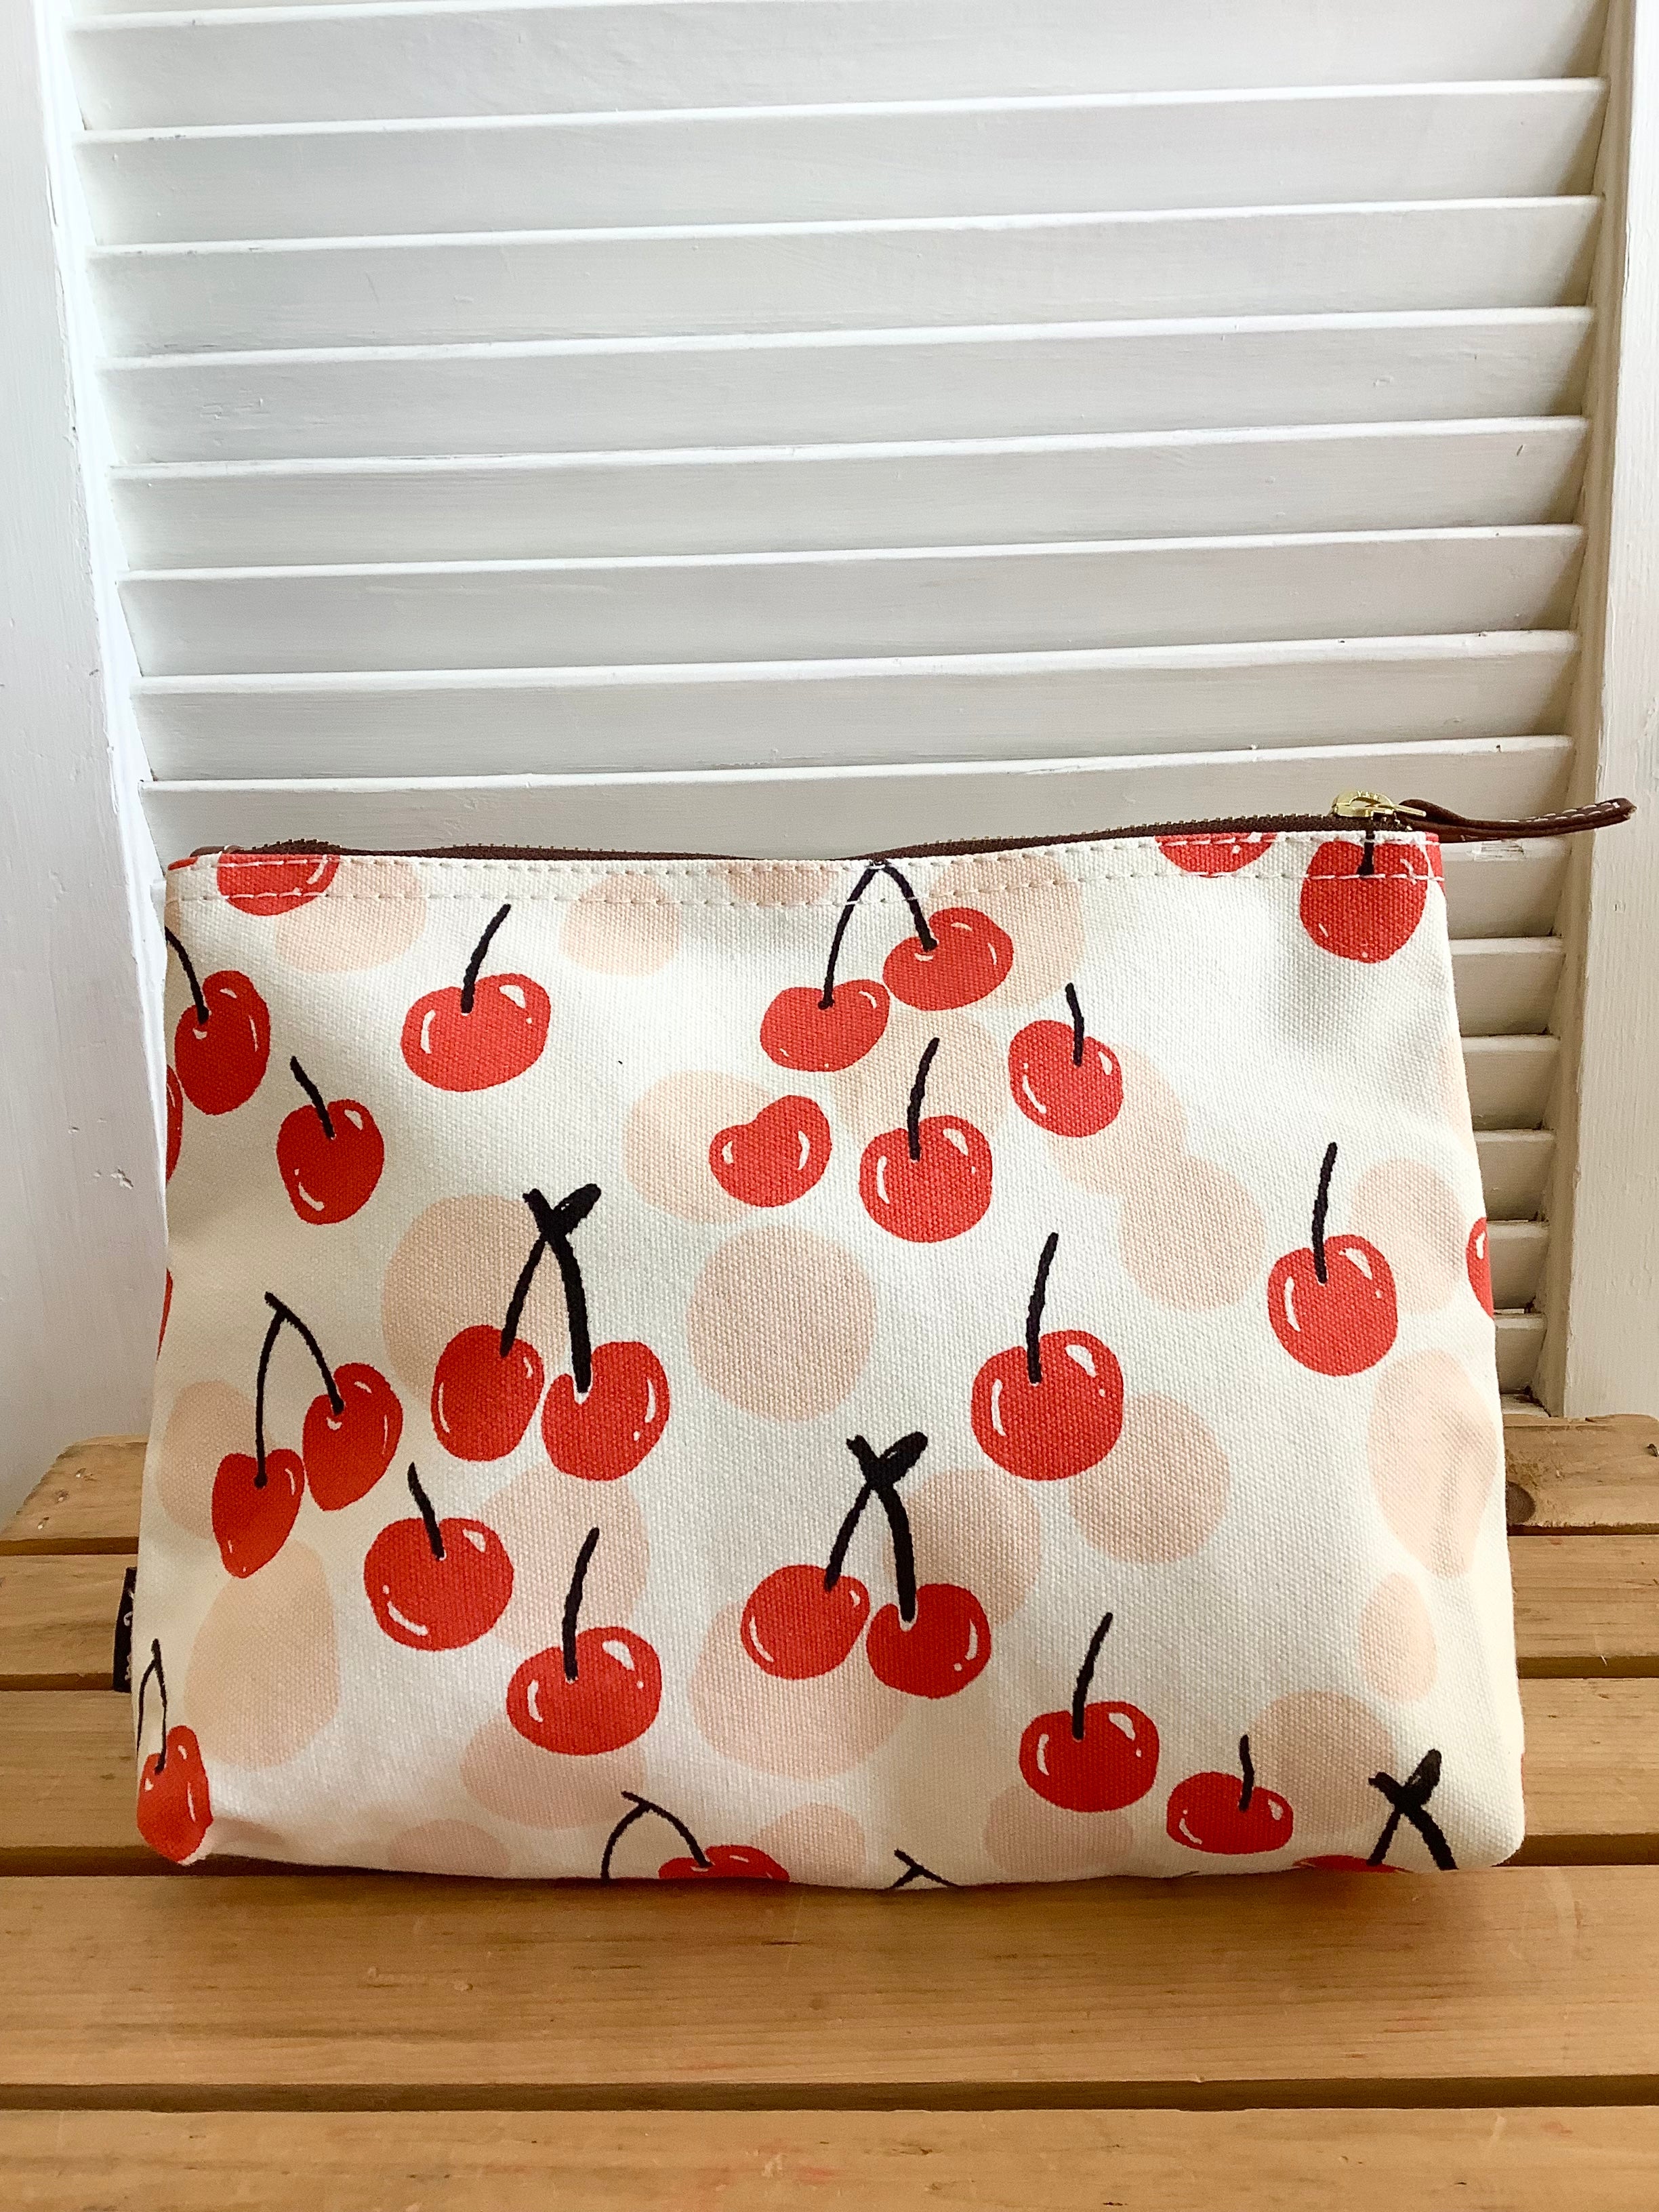 Cherries - large zipper pouch from Maika